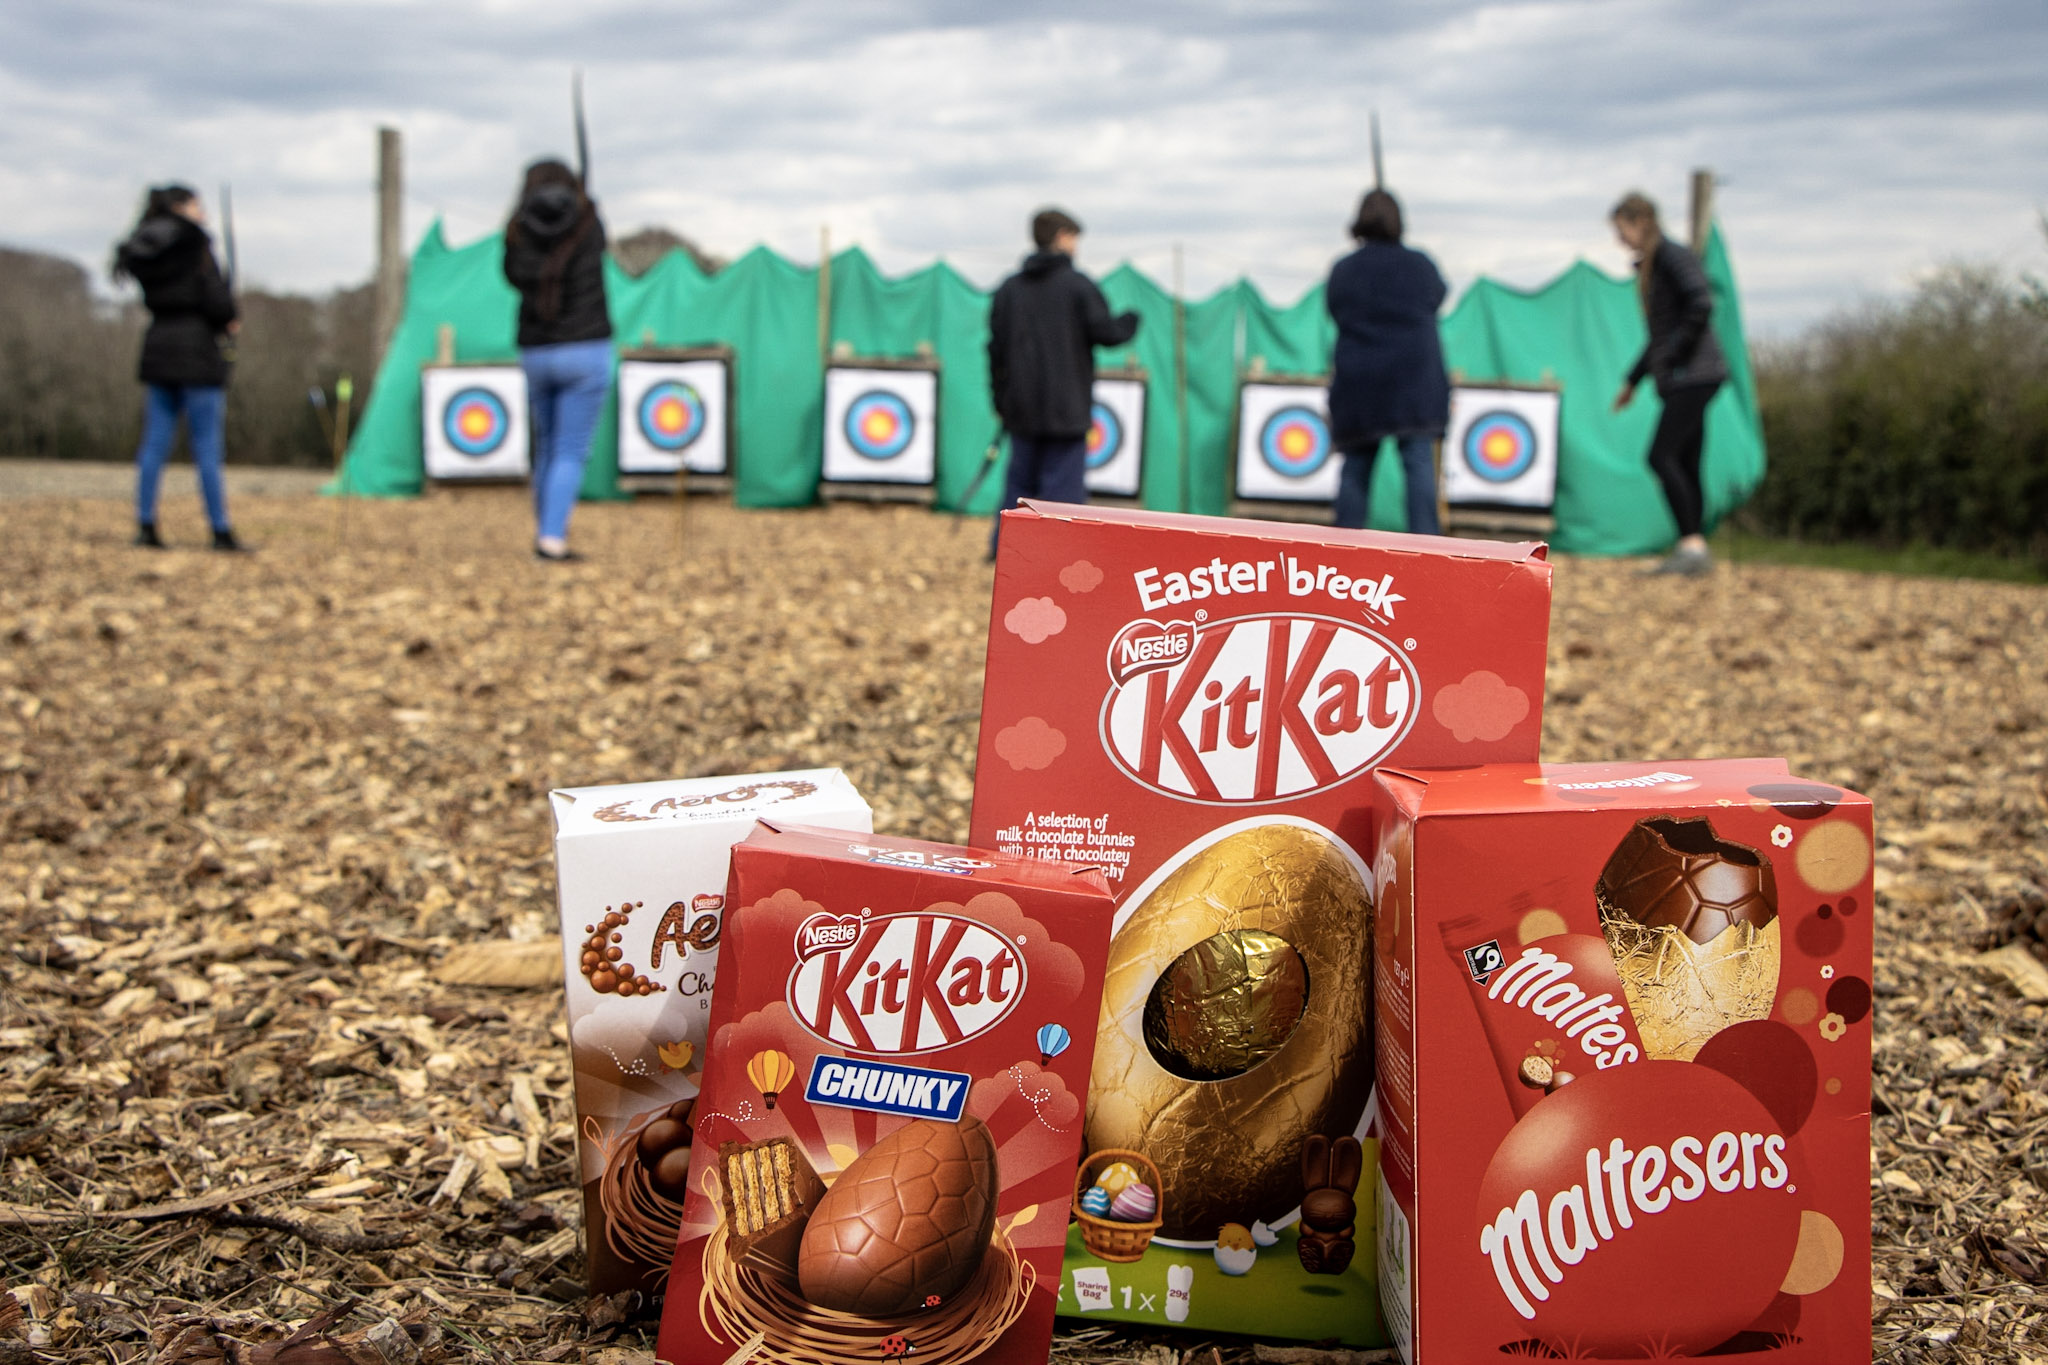 Easter archery tournament to win the biggest Easter egg